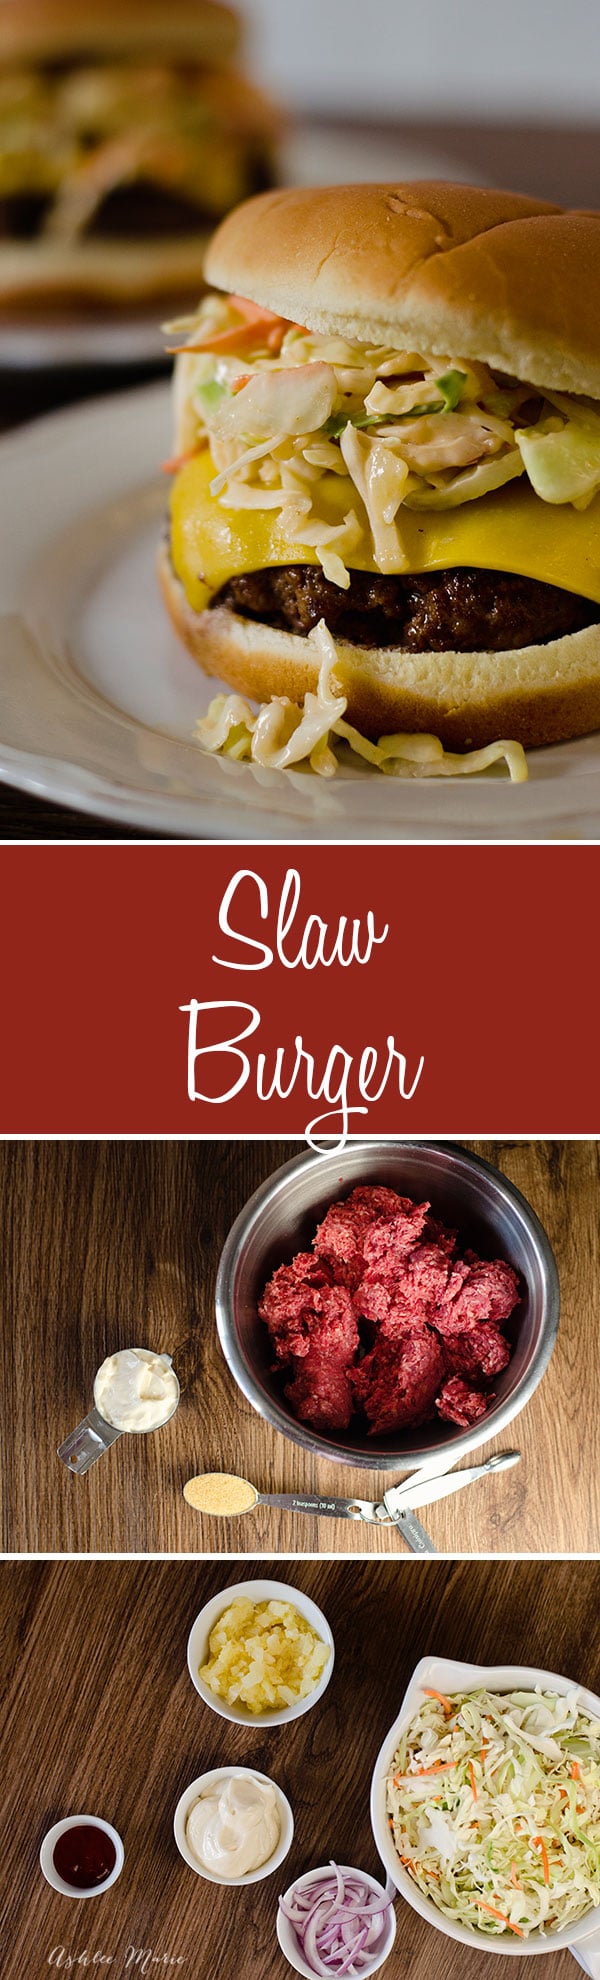 Adding Slaw to a burger is a tasty way to add flavorful veggies to your burger